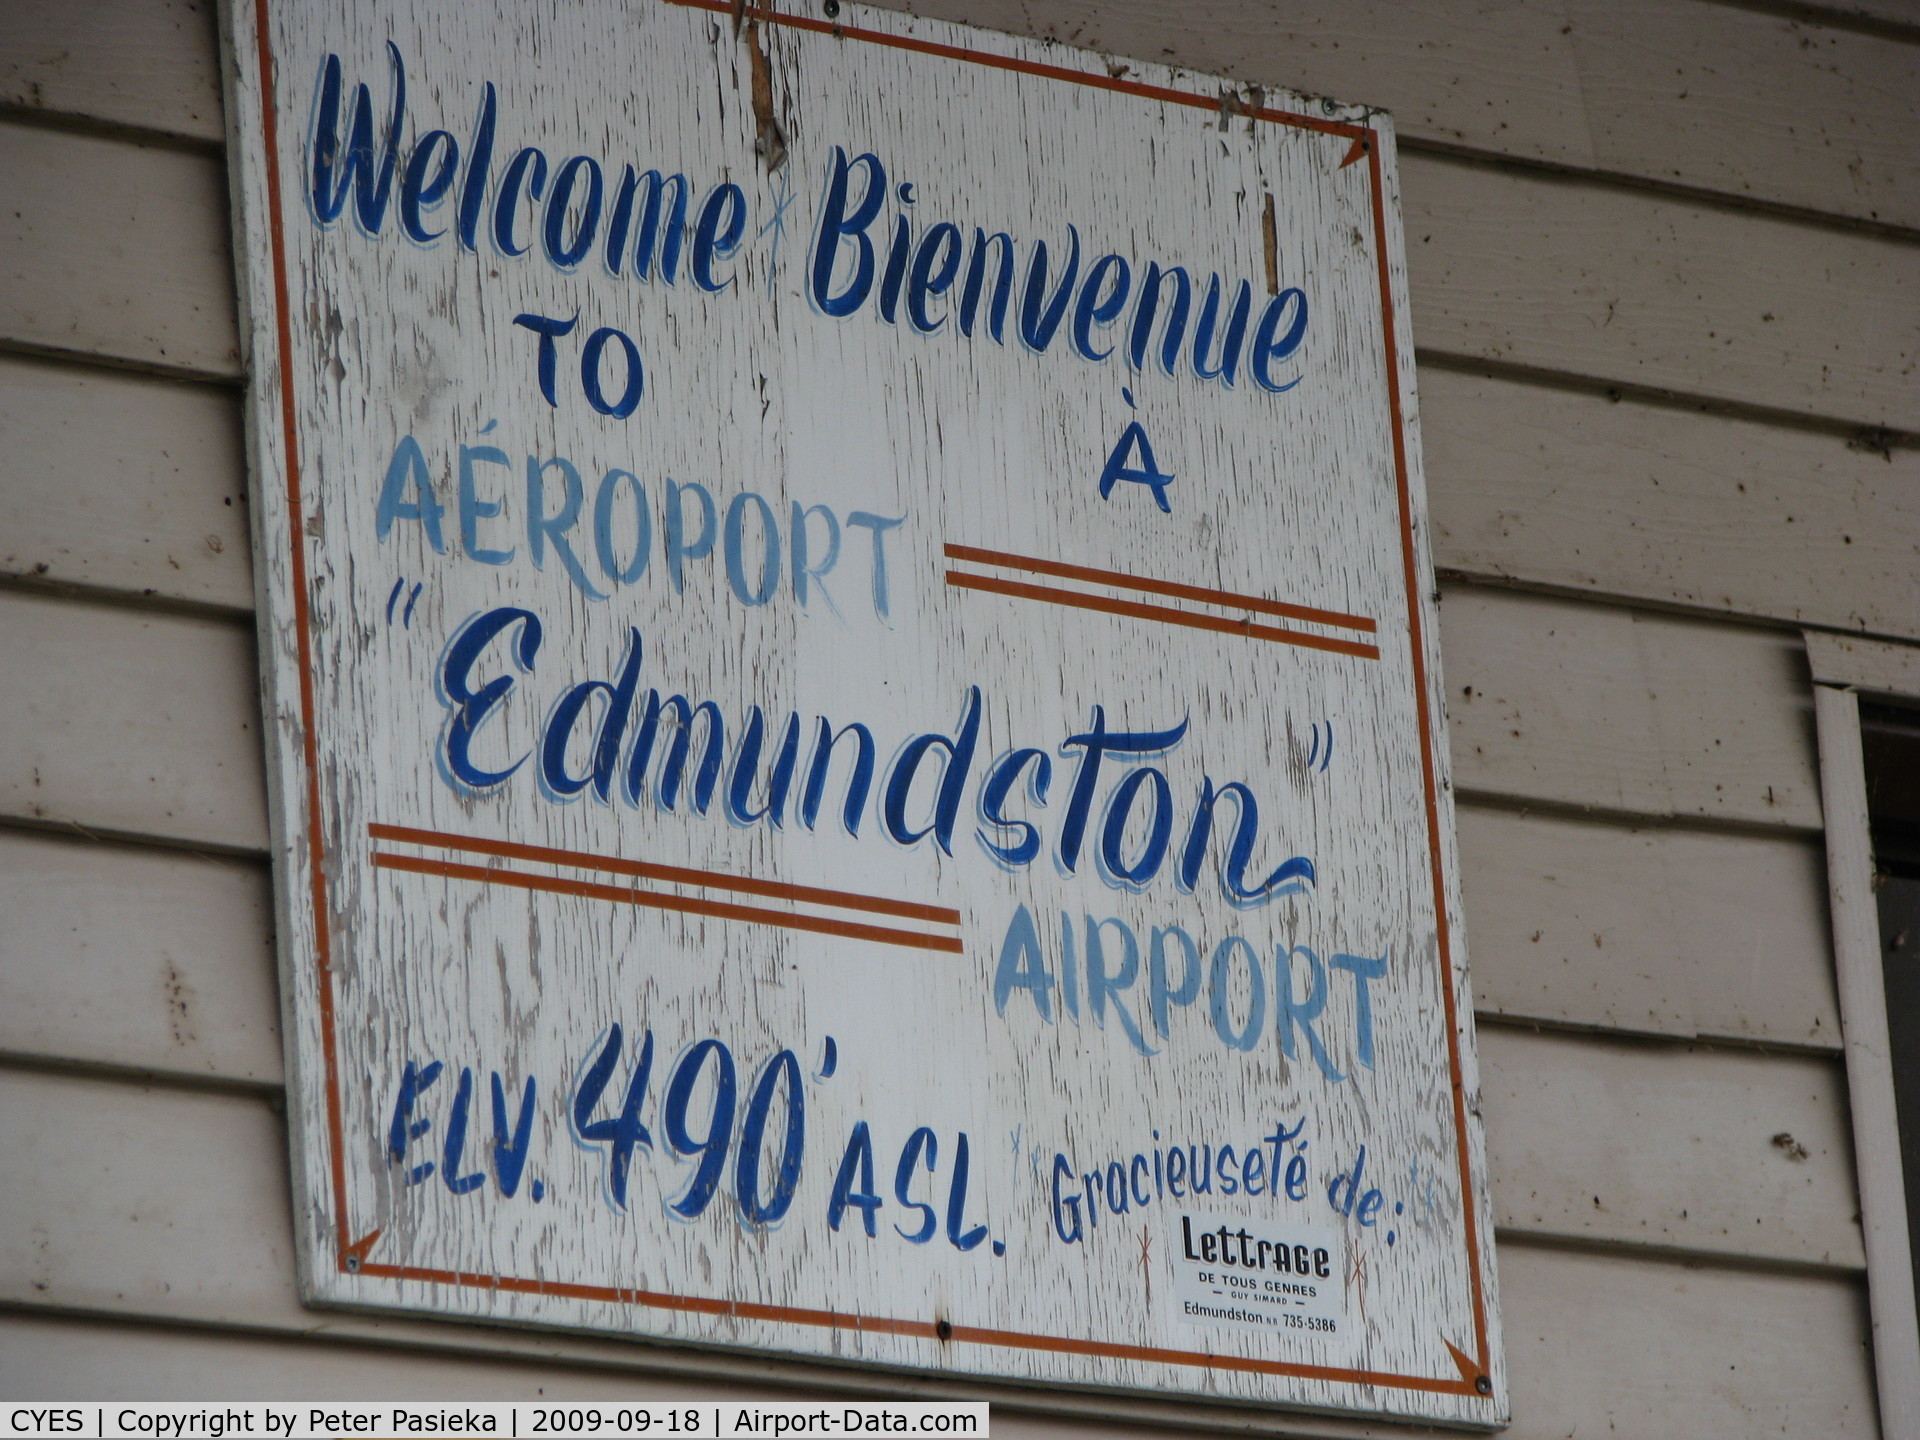 Edmundston Airport, Edmundston, New Brunswick Canada (CYES) - Welcome Sigh at the terminal building